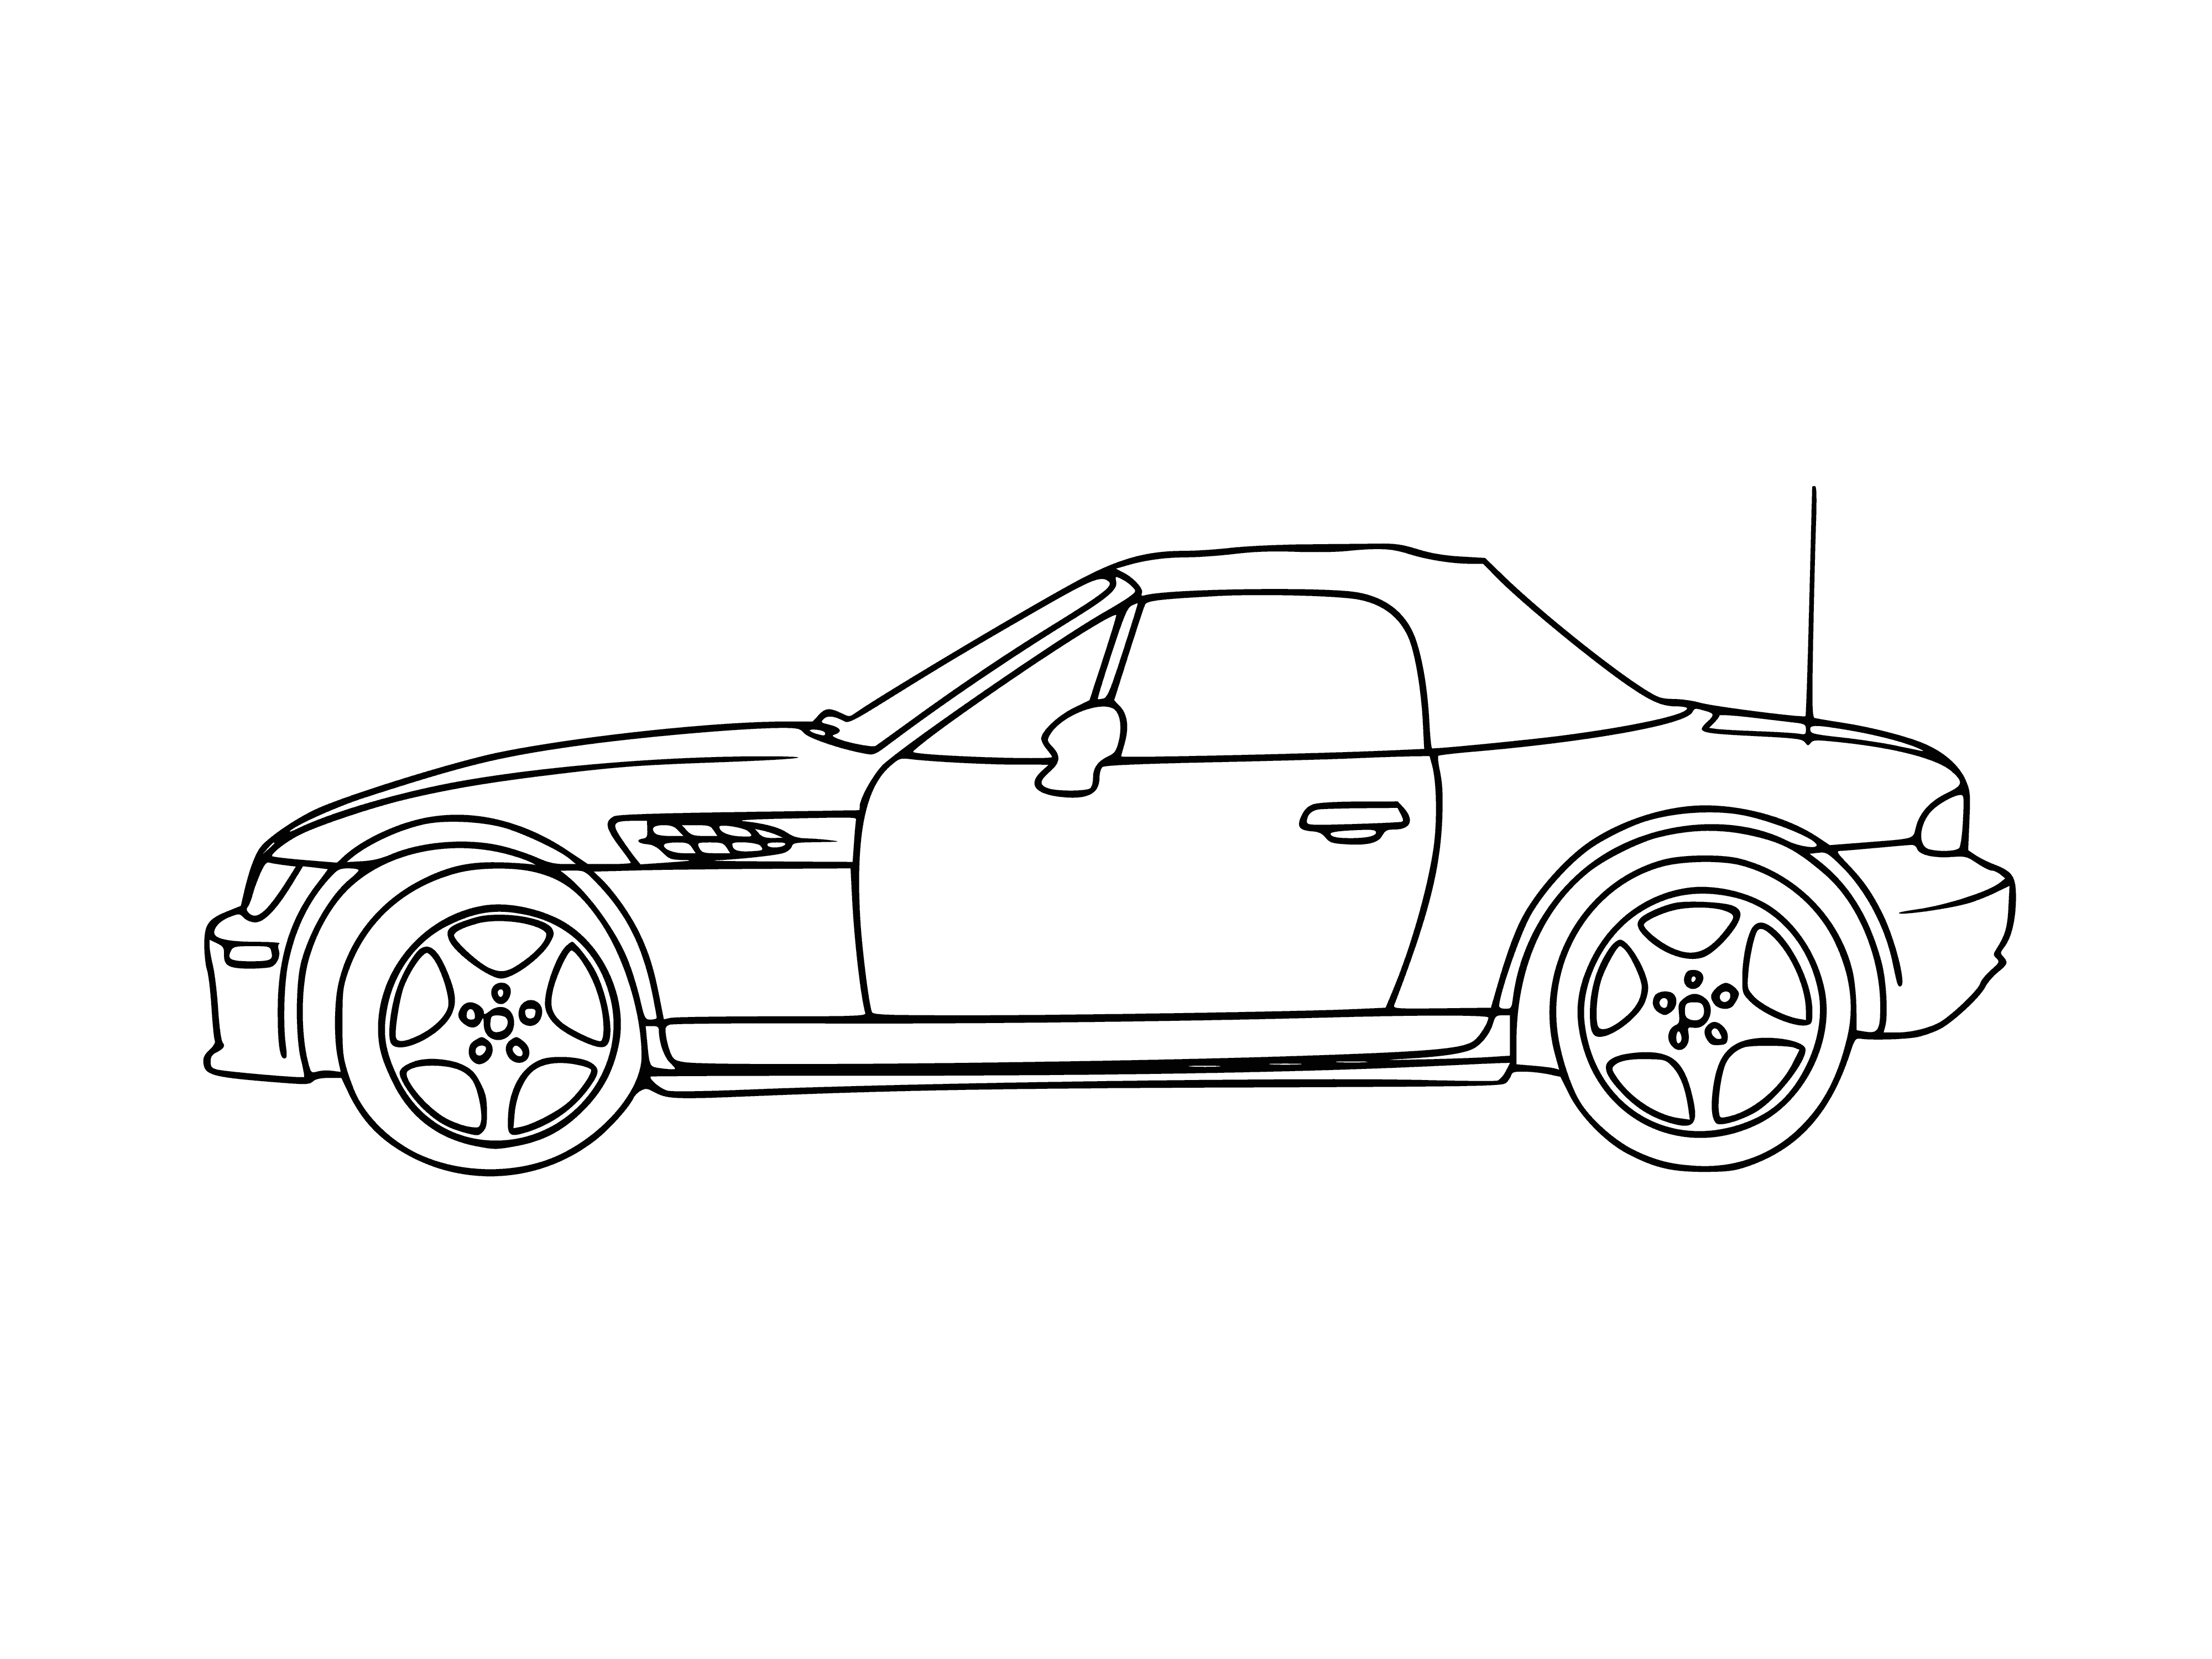 coloring page: Car with retractable/removable soft/metal top, allowing driver to enjoy open-air transportation.